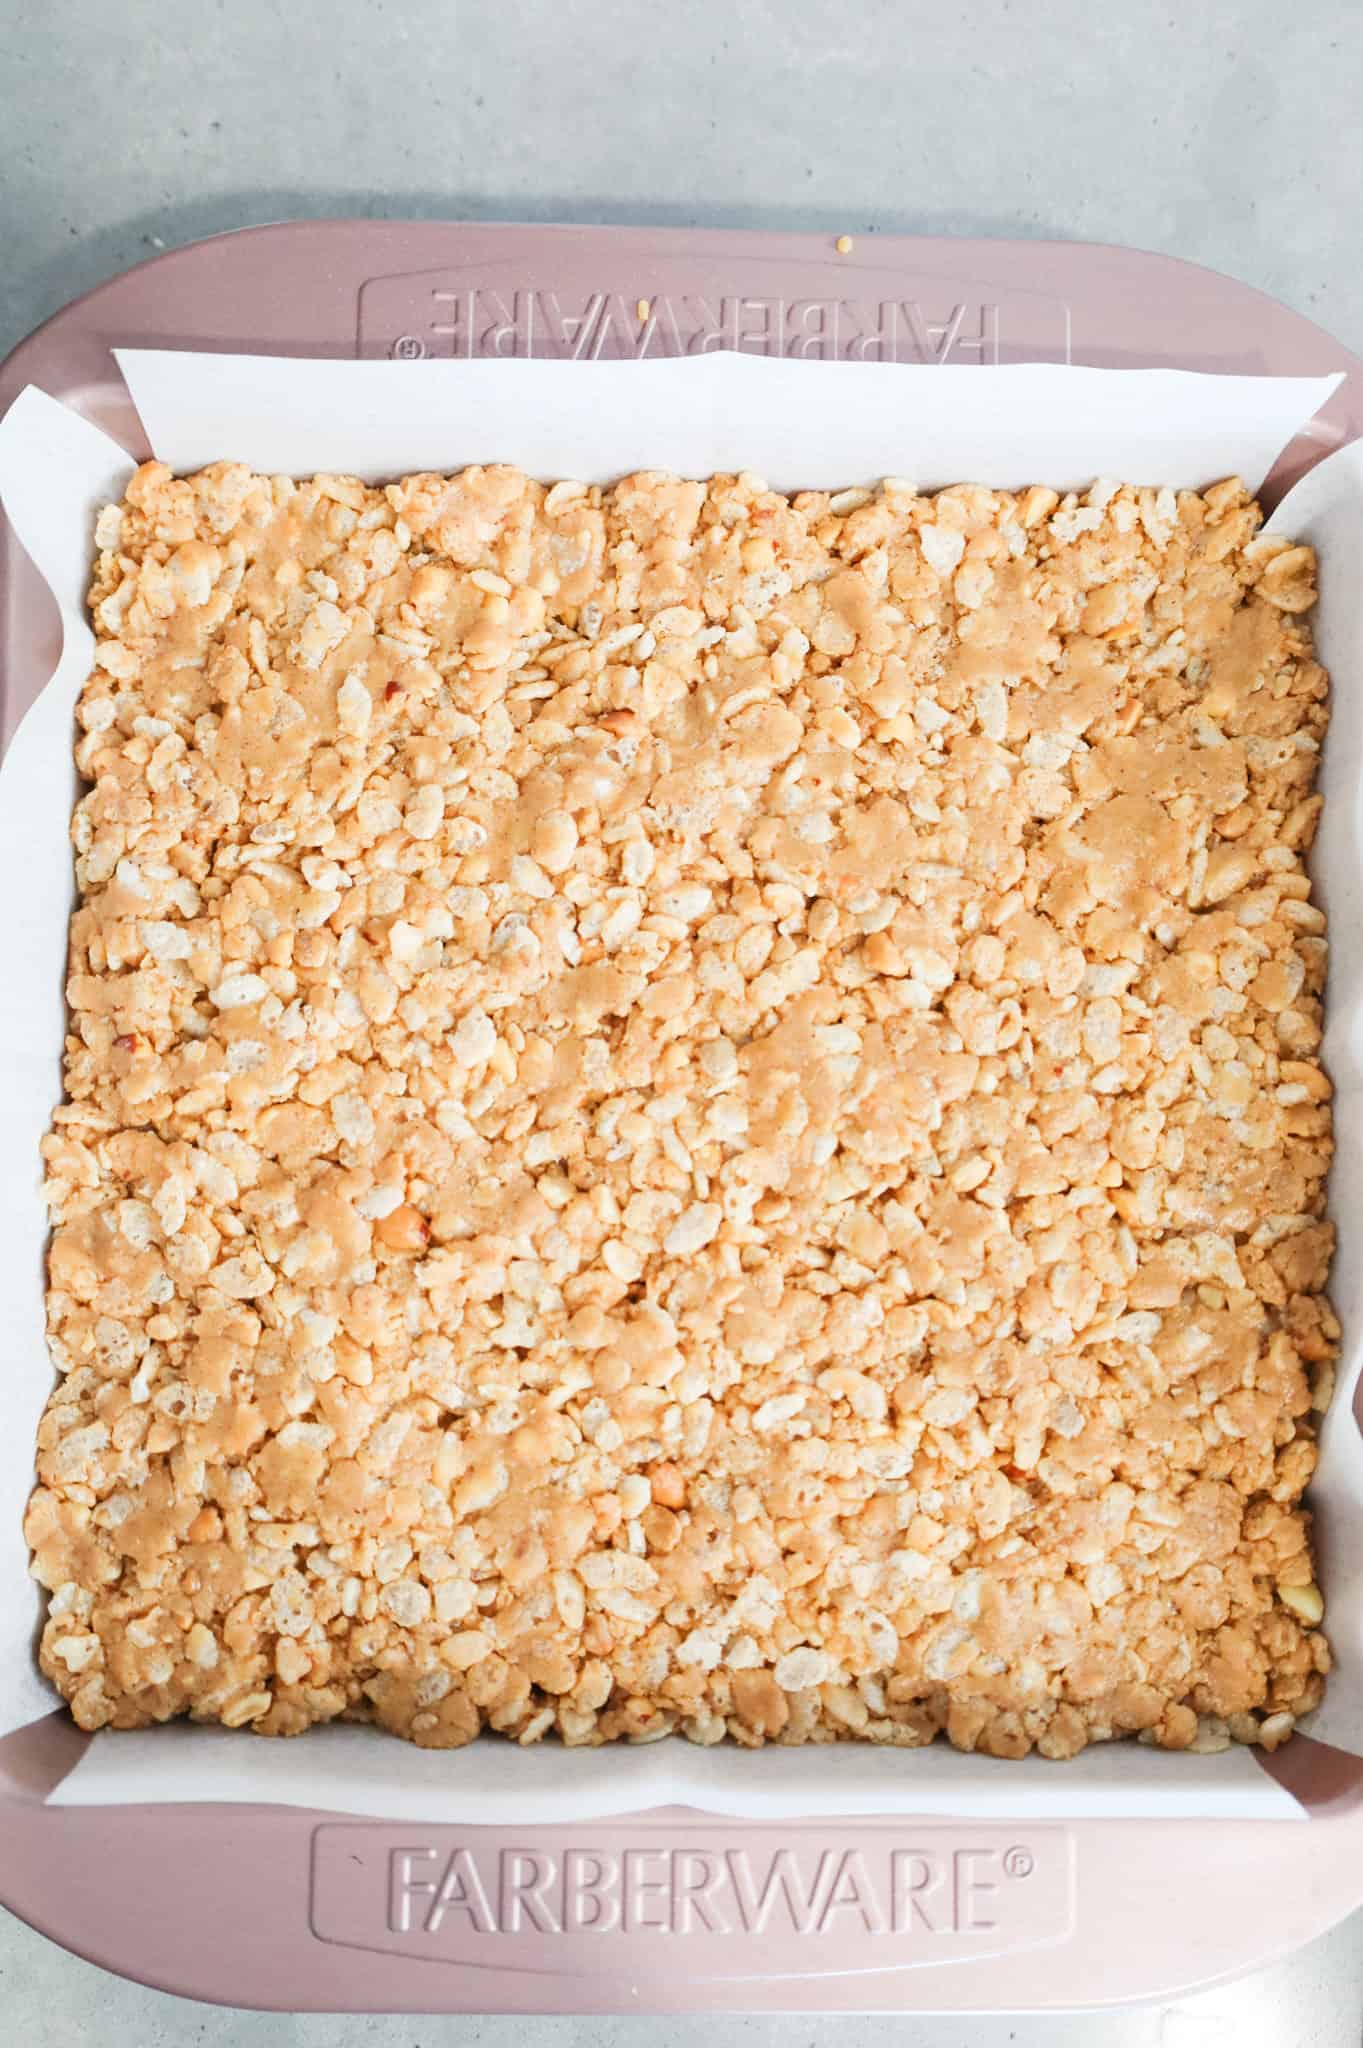 peanut butter rice krispie mixture in a parchment lined baking pan